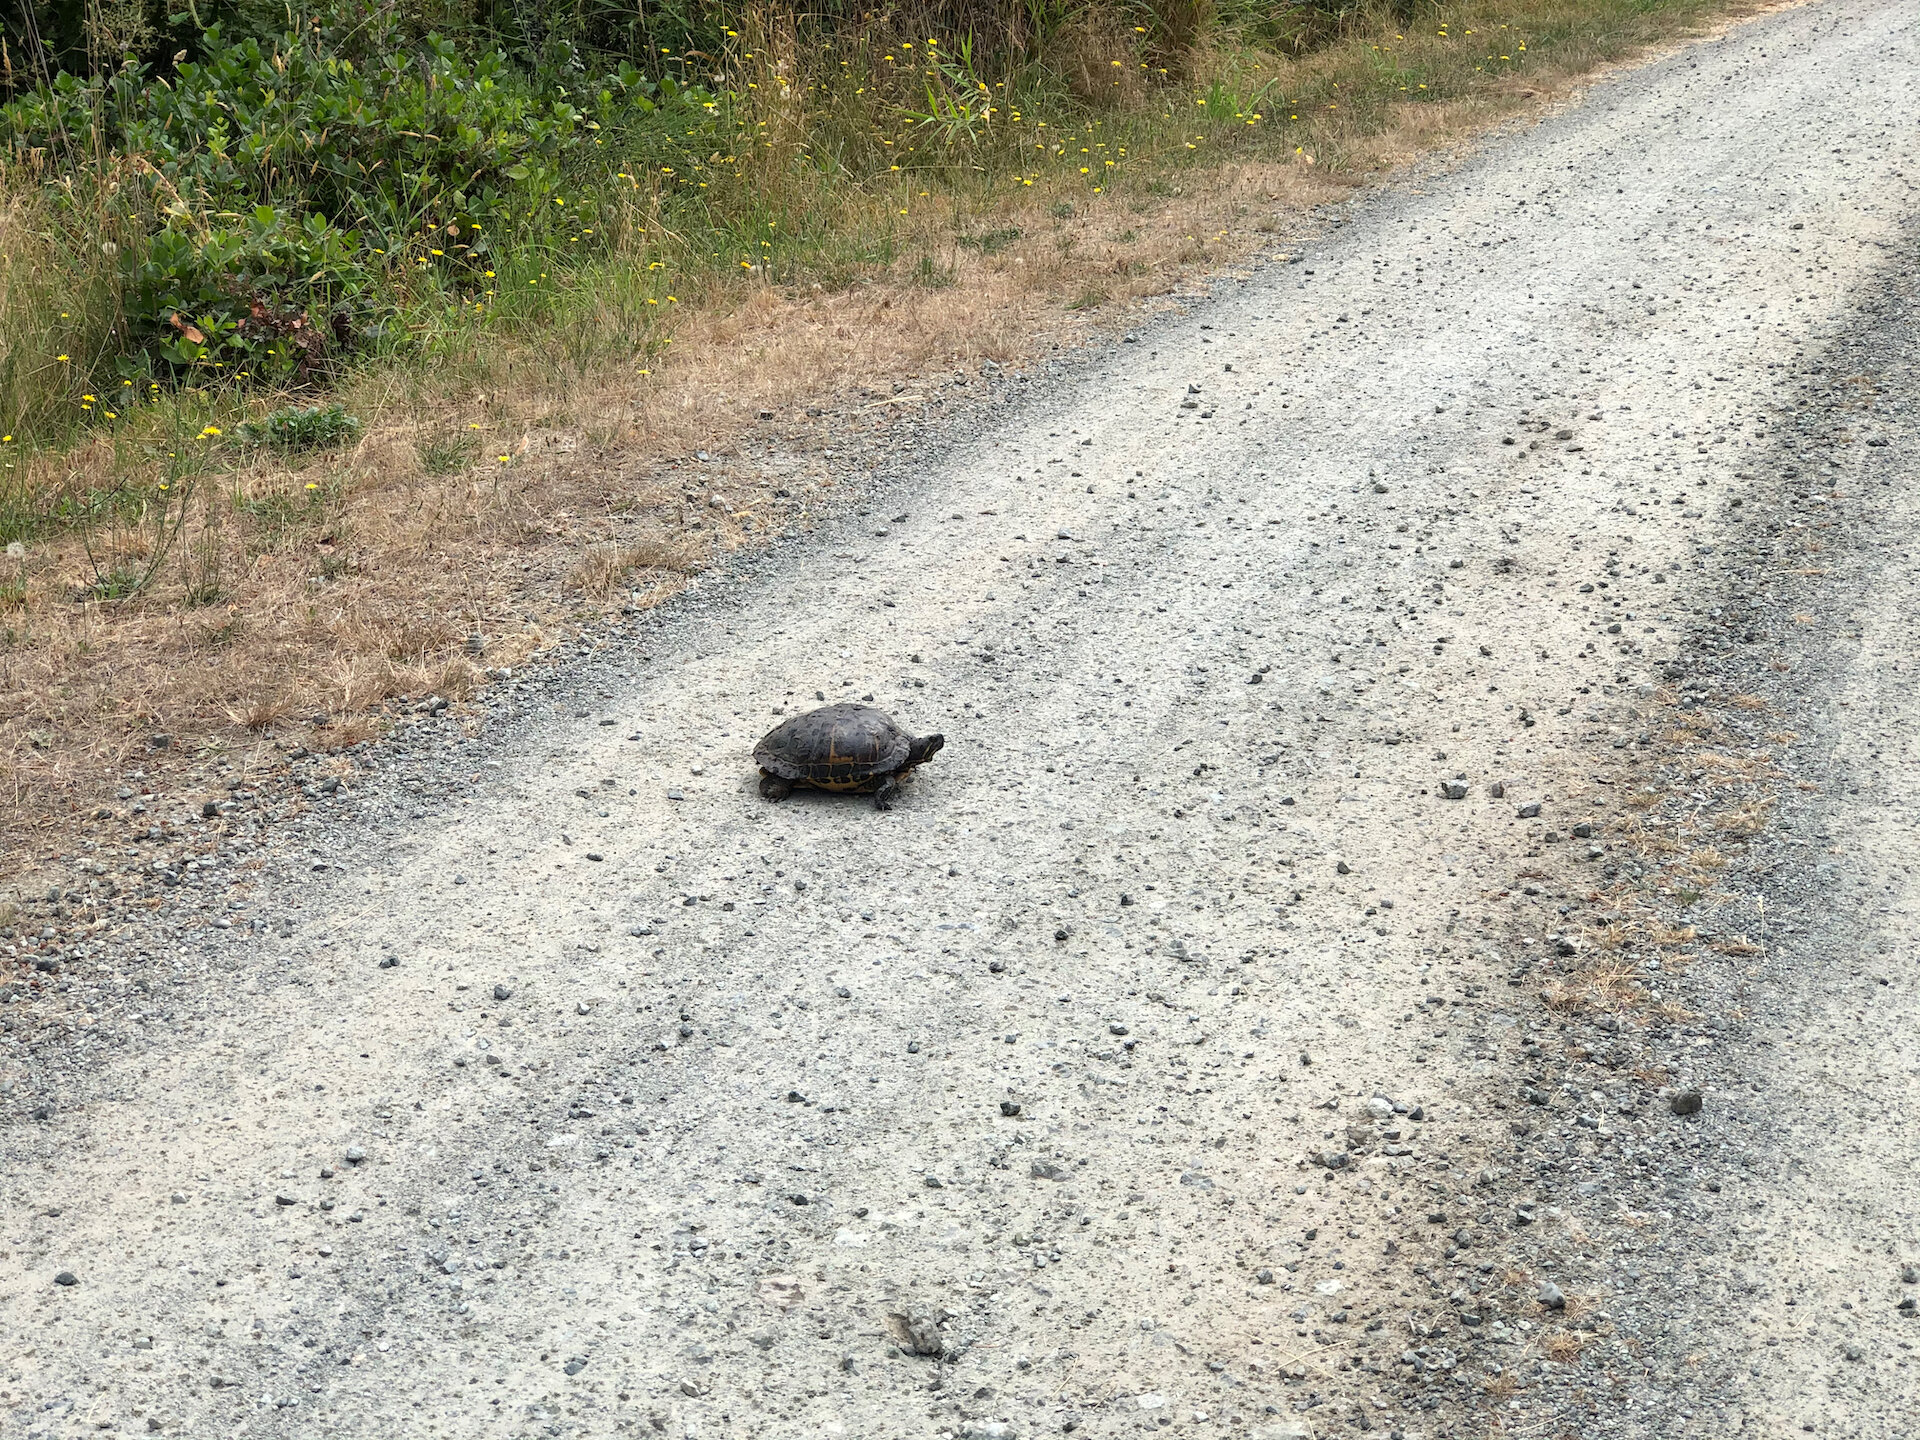  We stopped to move the turtle off the road. 